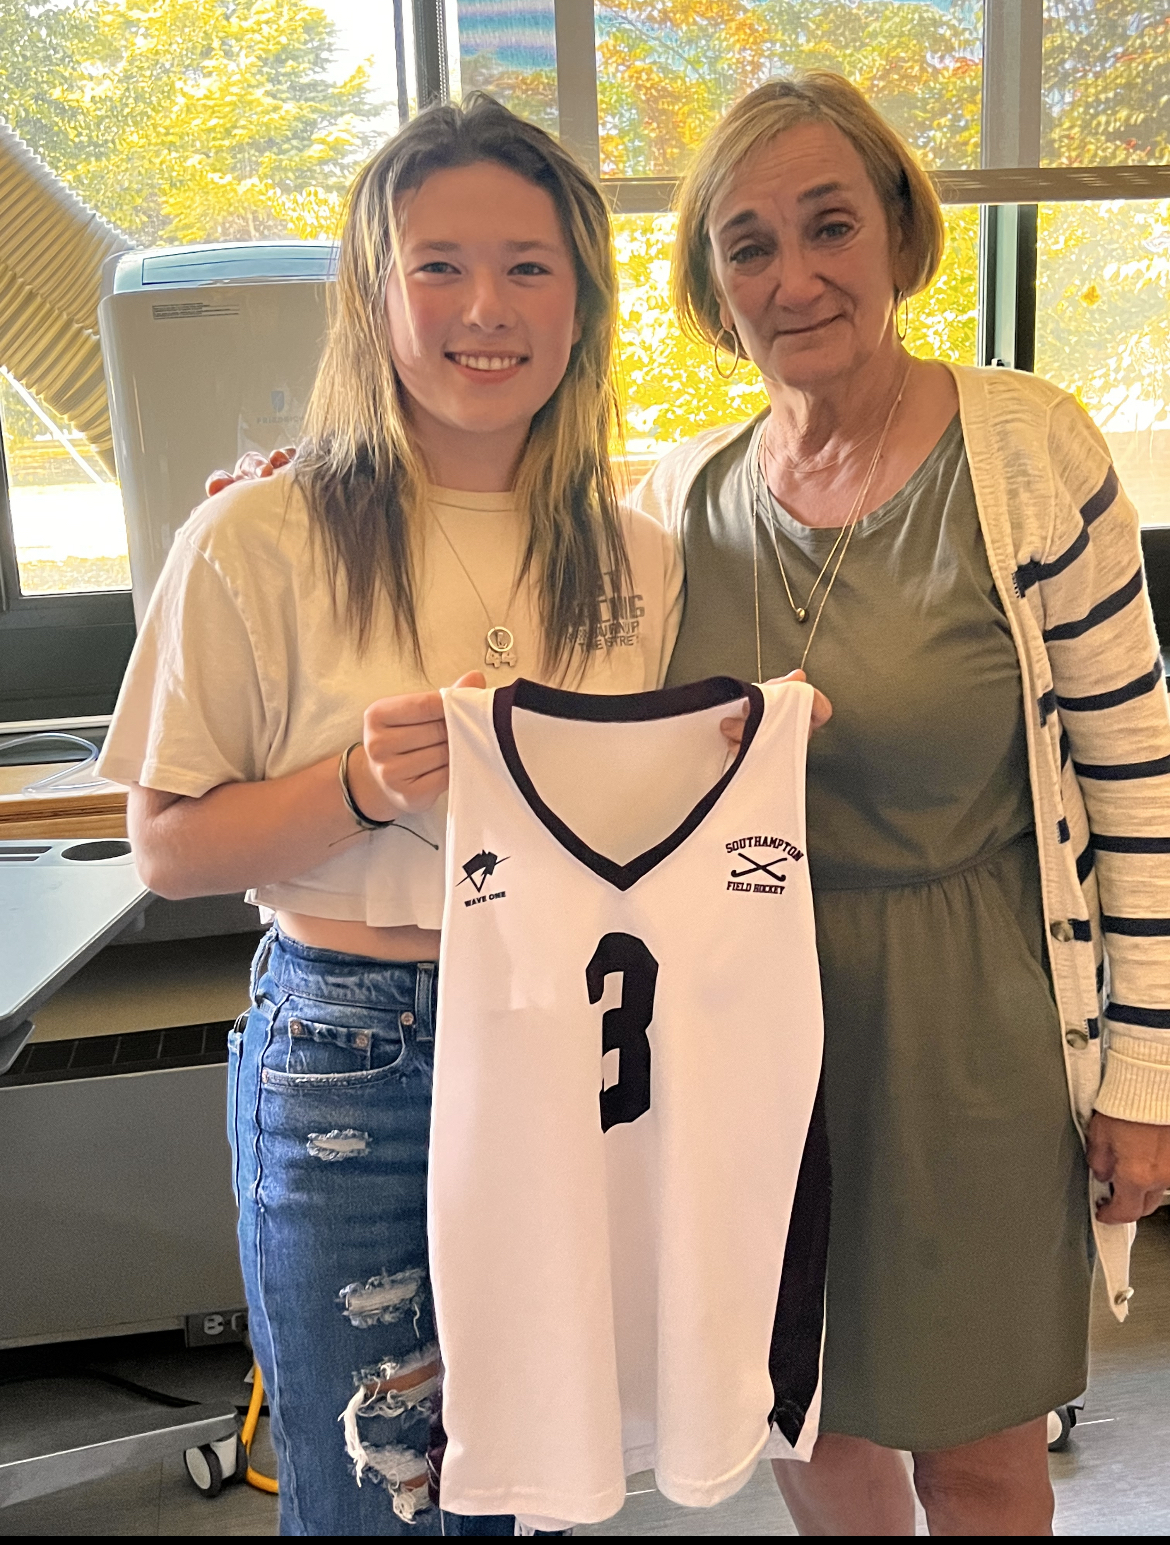 Southampton High School’s fall athletes recently demonstrated their appreciation to staff members who have positively influenced them by asking Varsity field hockey player Chloe Phillips presented her jersey to Roseann Gentile, Southampton Intermediate School play director and senior office assistant. COURTESY SOUTHAMPTON SCHOOL DISTRICT